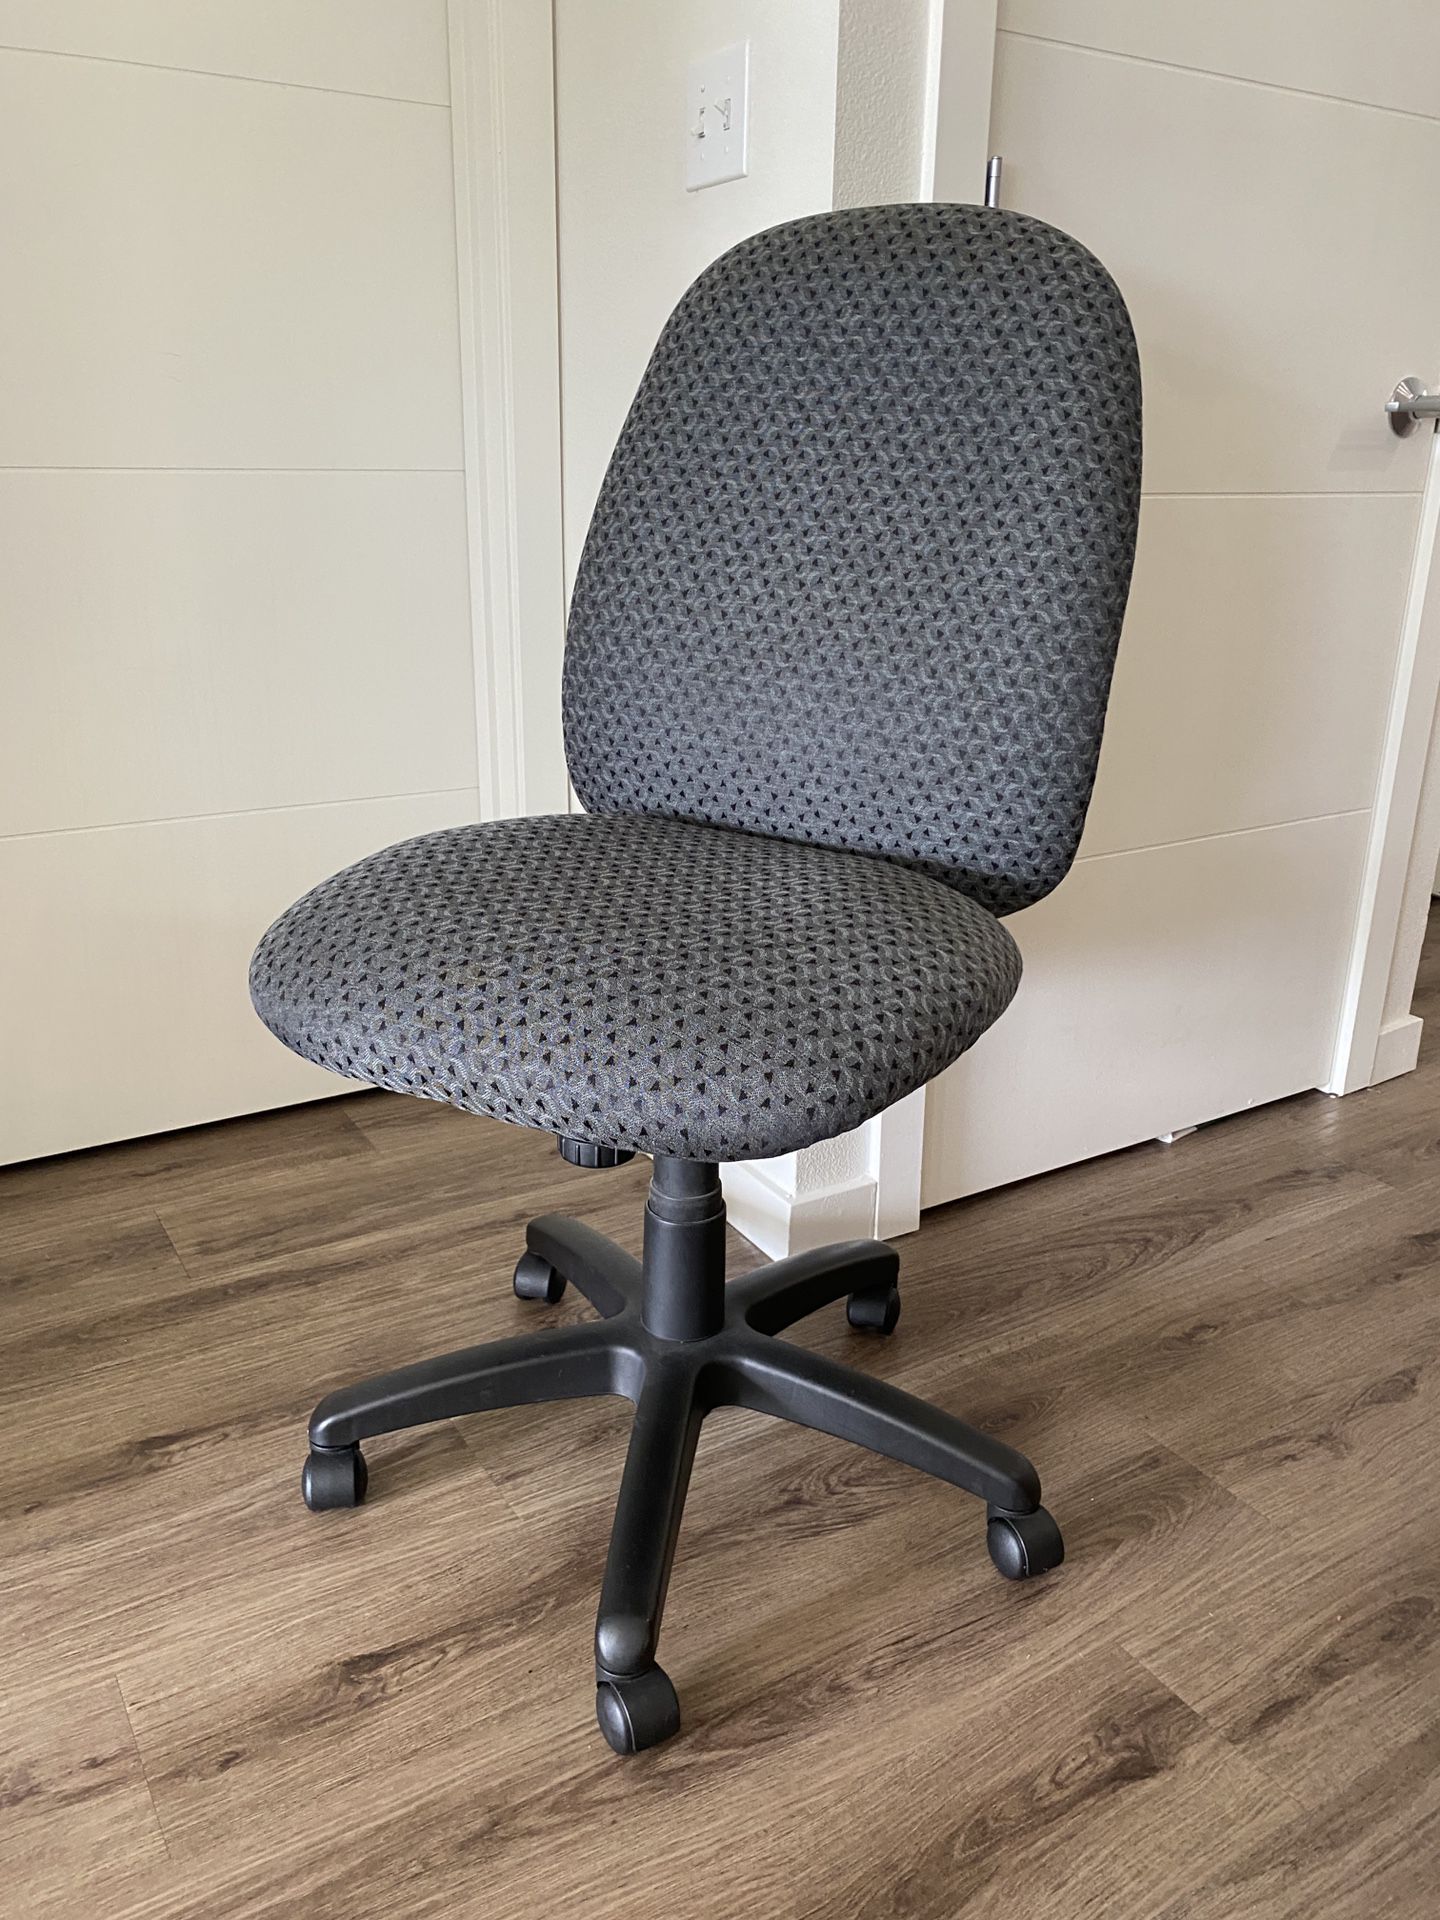 Adjustable Office Chair - NEED GONE